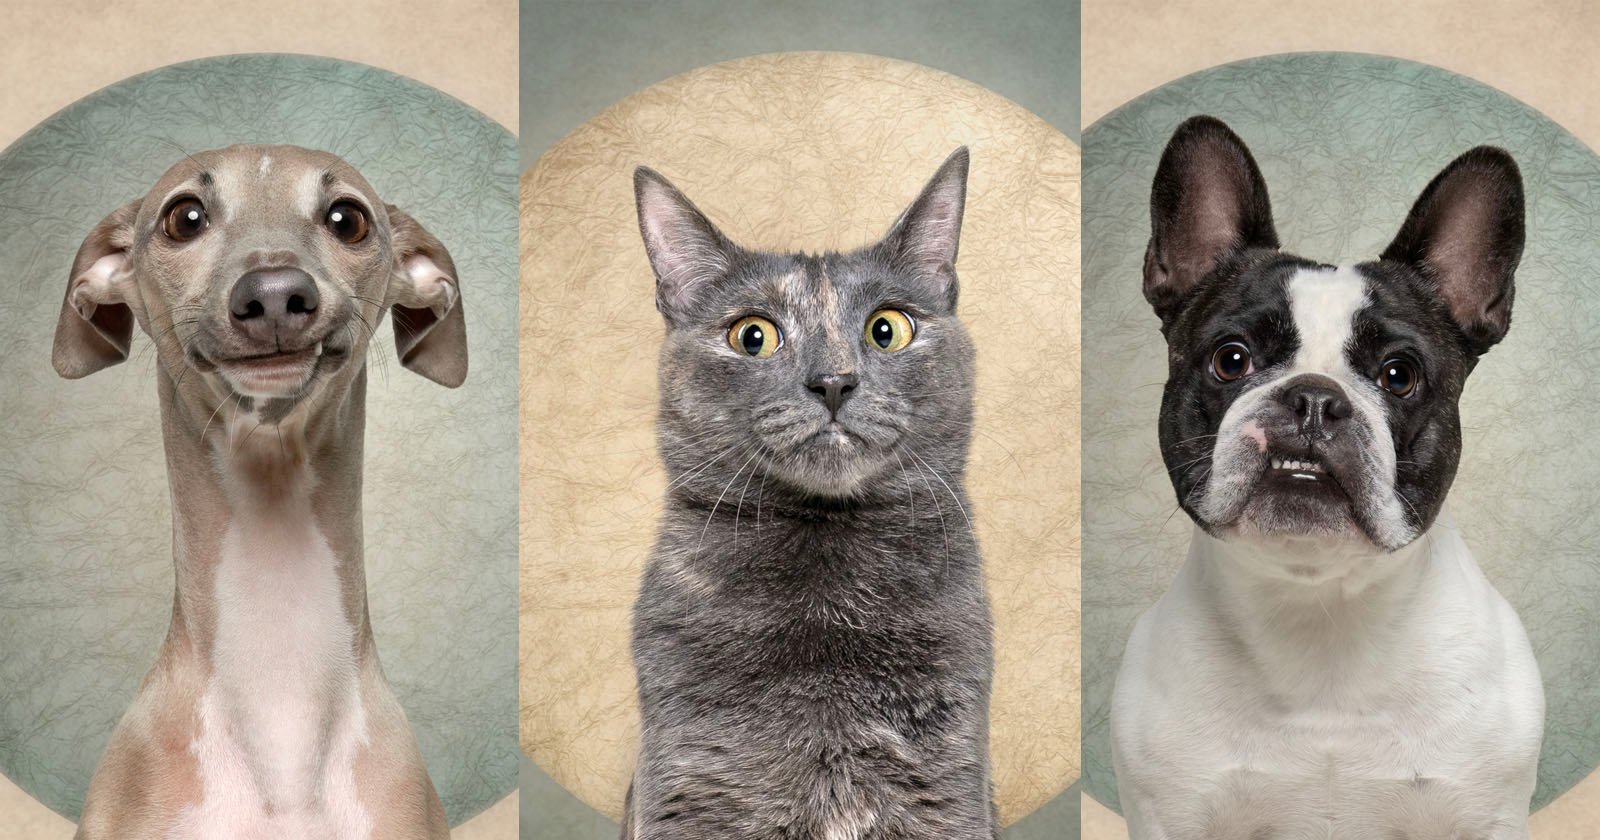  pet photographer captures expressive dogs one guilty-looking 